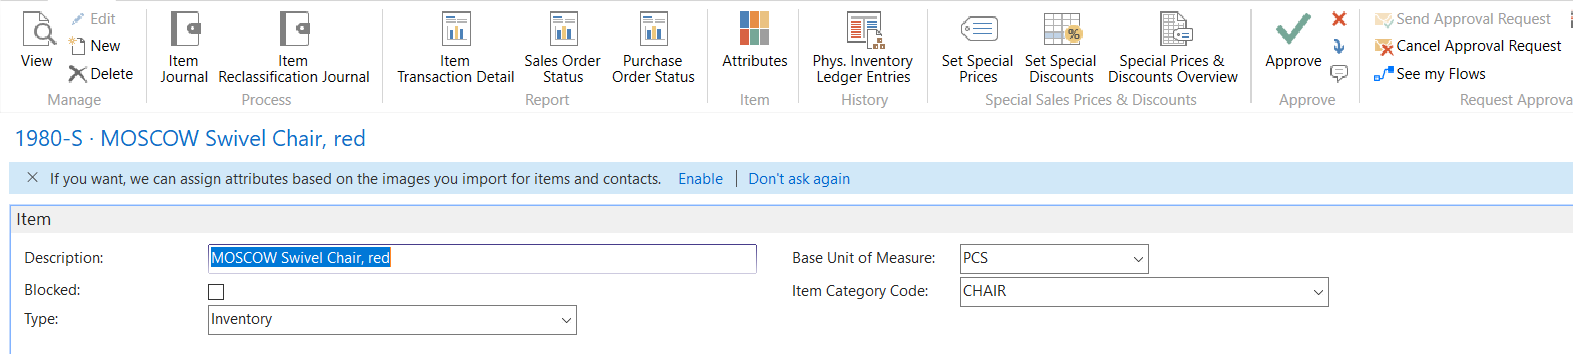 Figure 6 - Approval Entry Item Card in Microsoft Dynamics NAV/Business Central